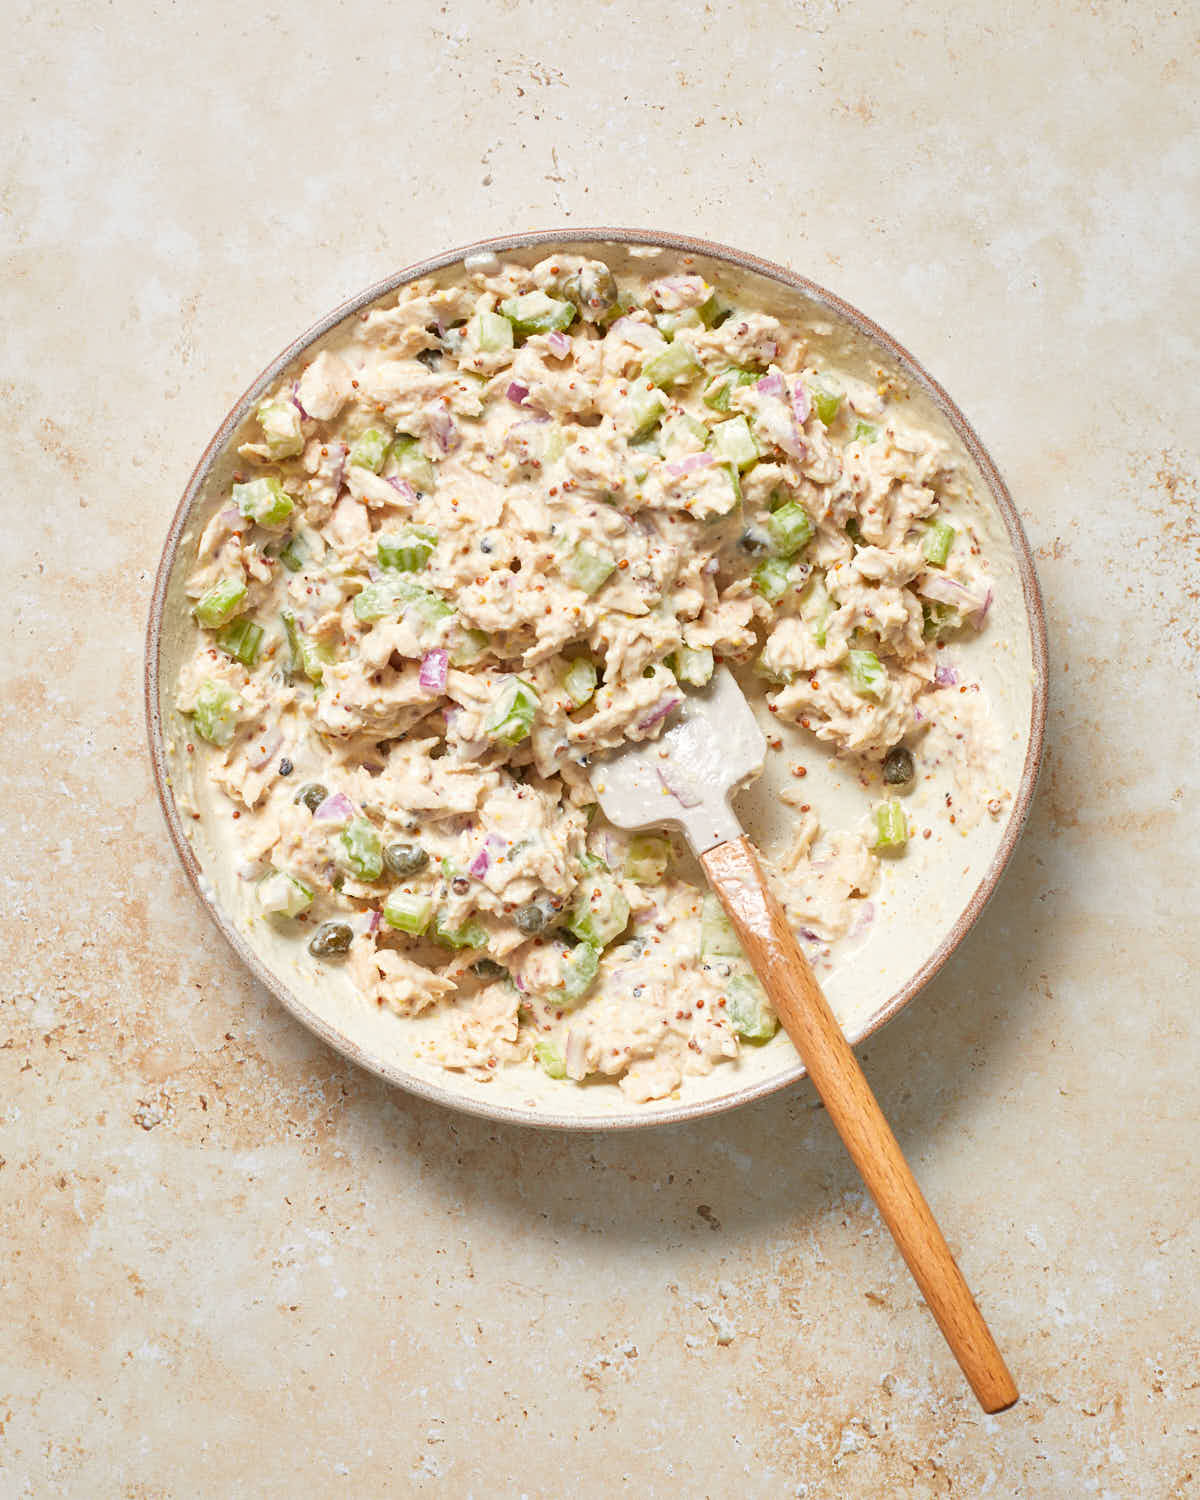 Tuna salad ingredients mixed together in a bowl.